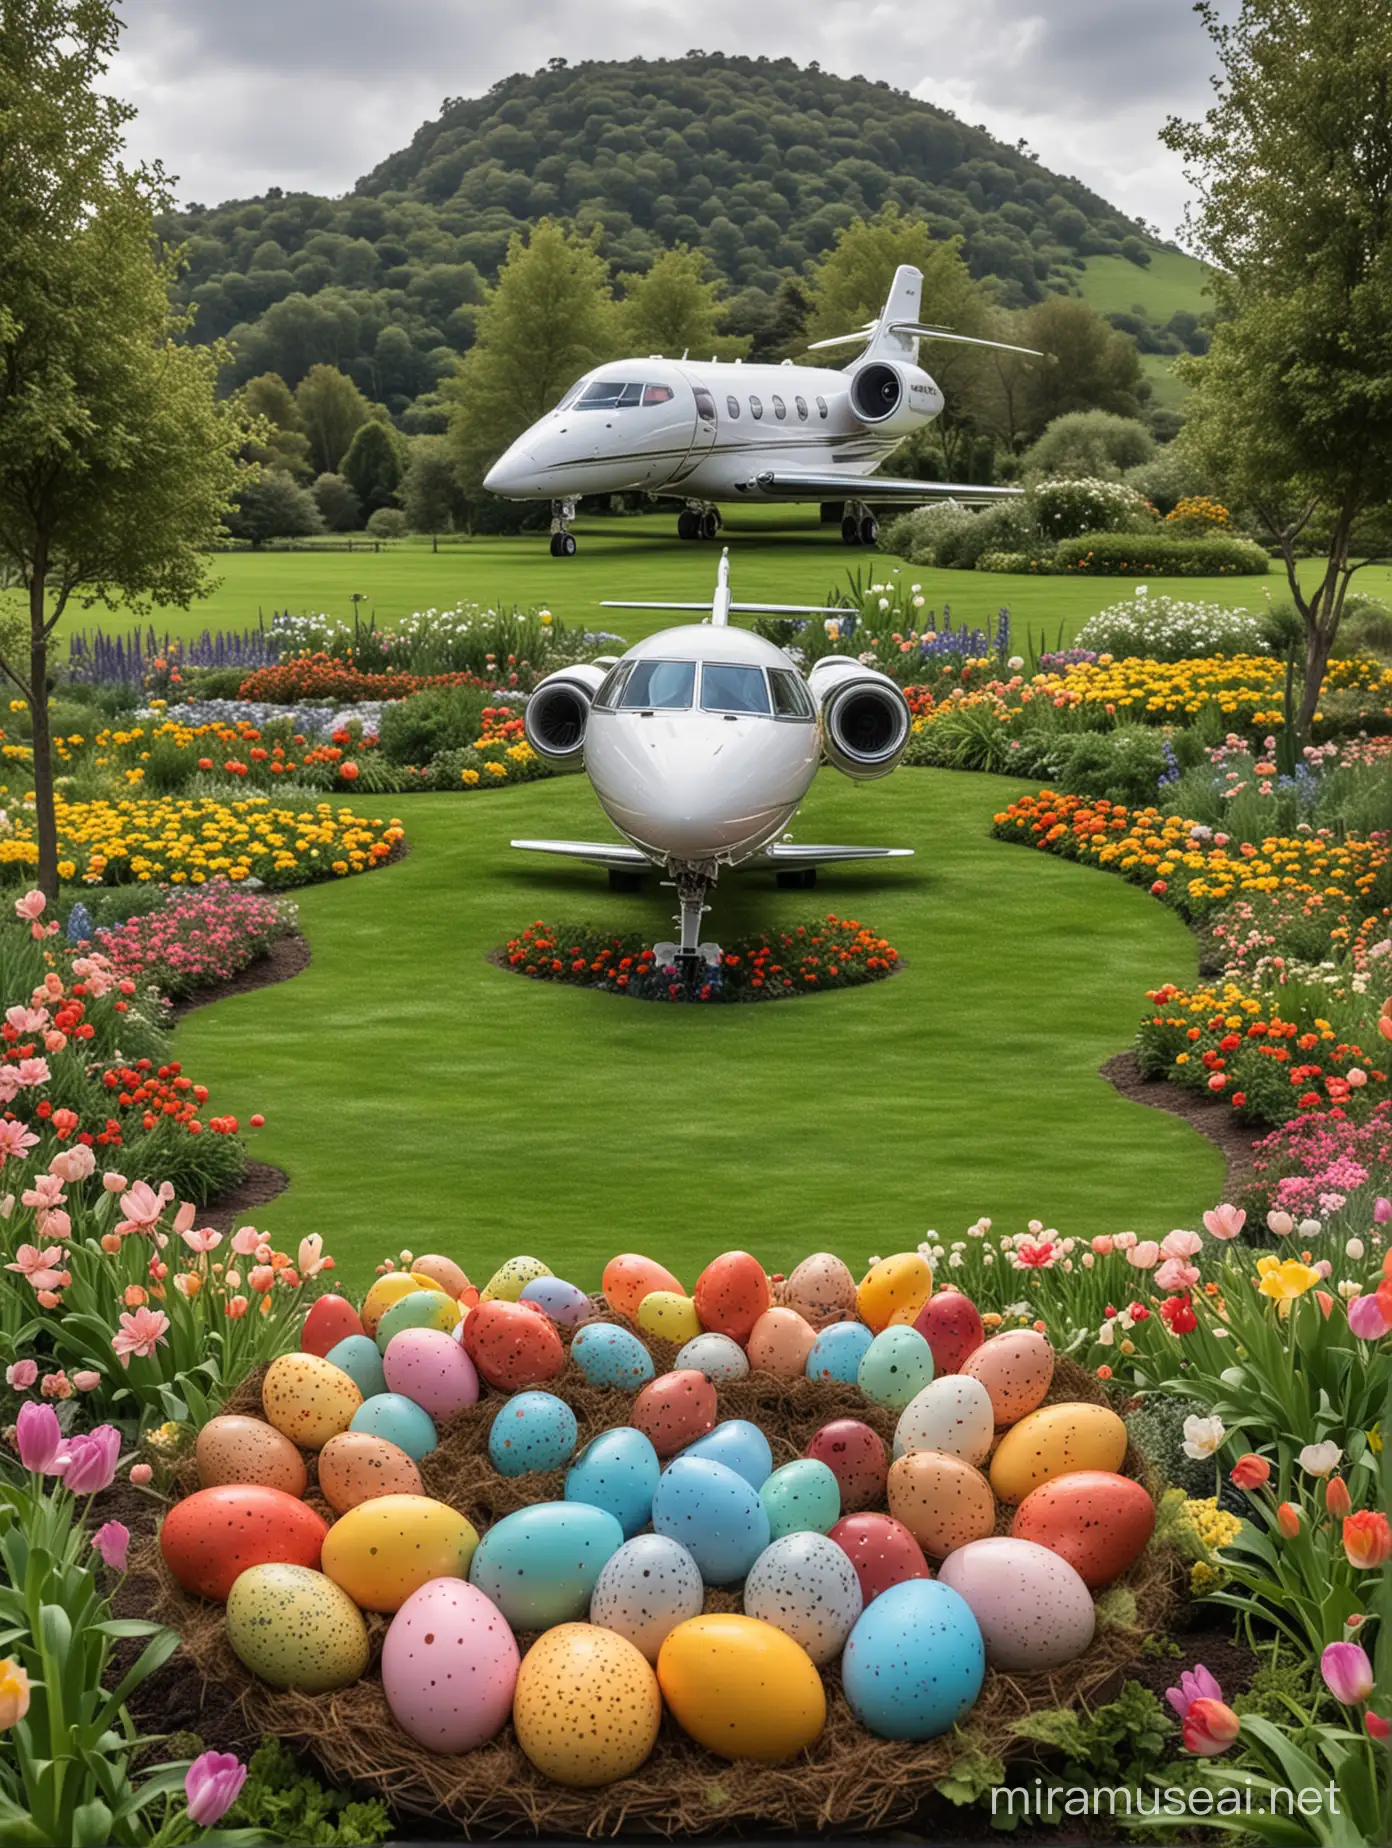 Garden-like place, full of easter egg, leave the center empty so I can put a private jet. Make the view in eye level